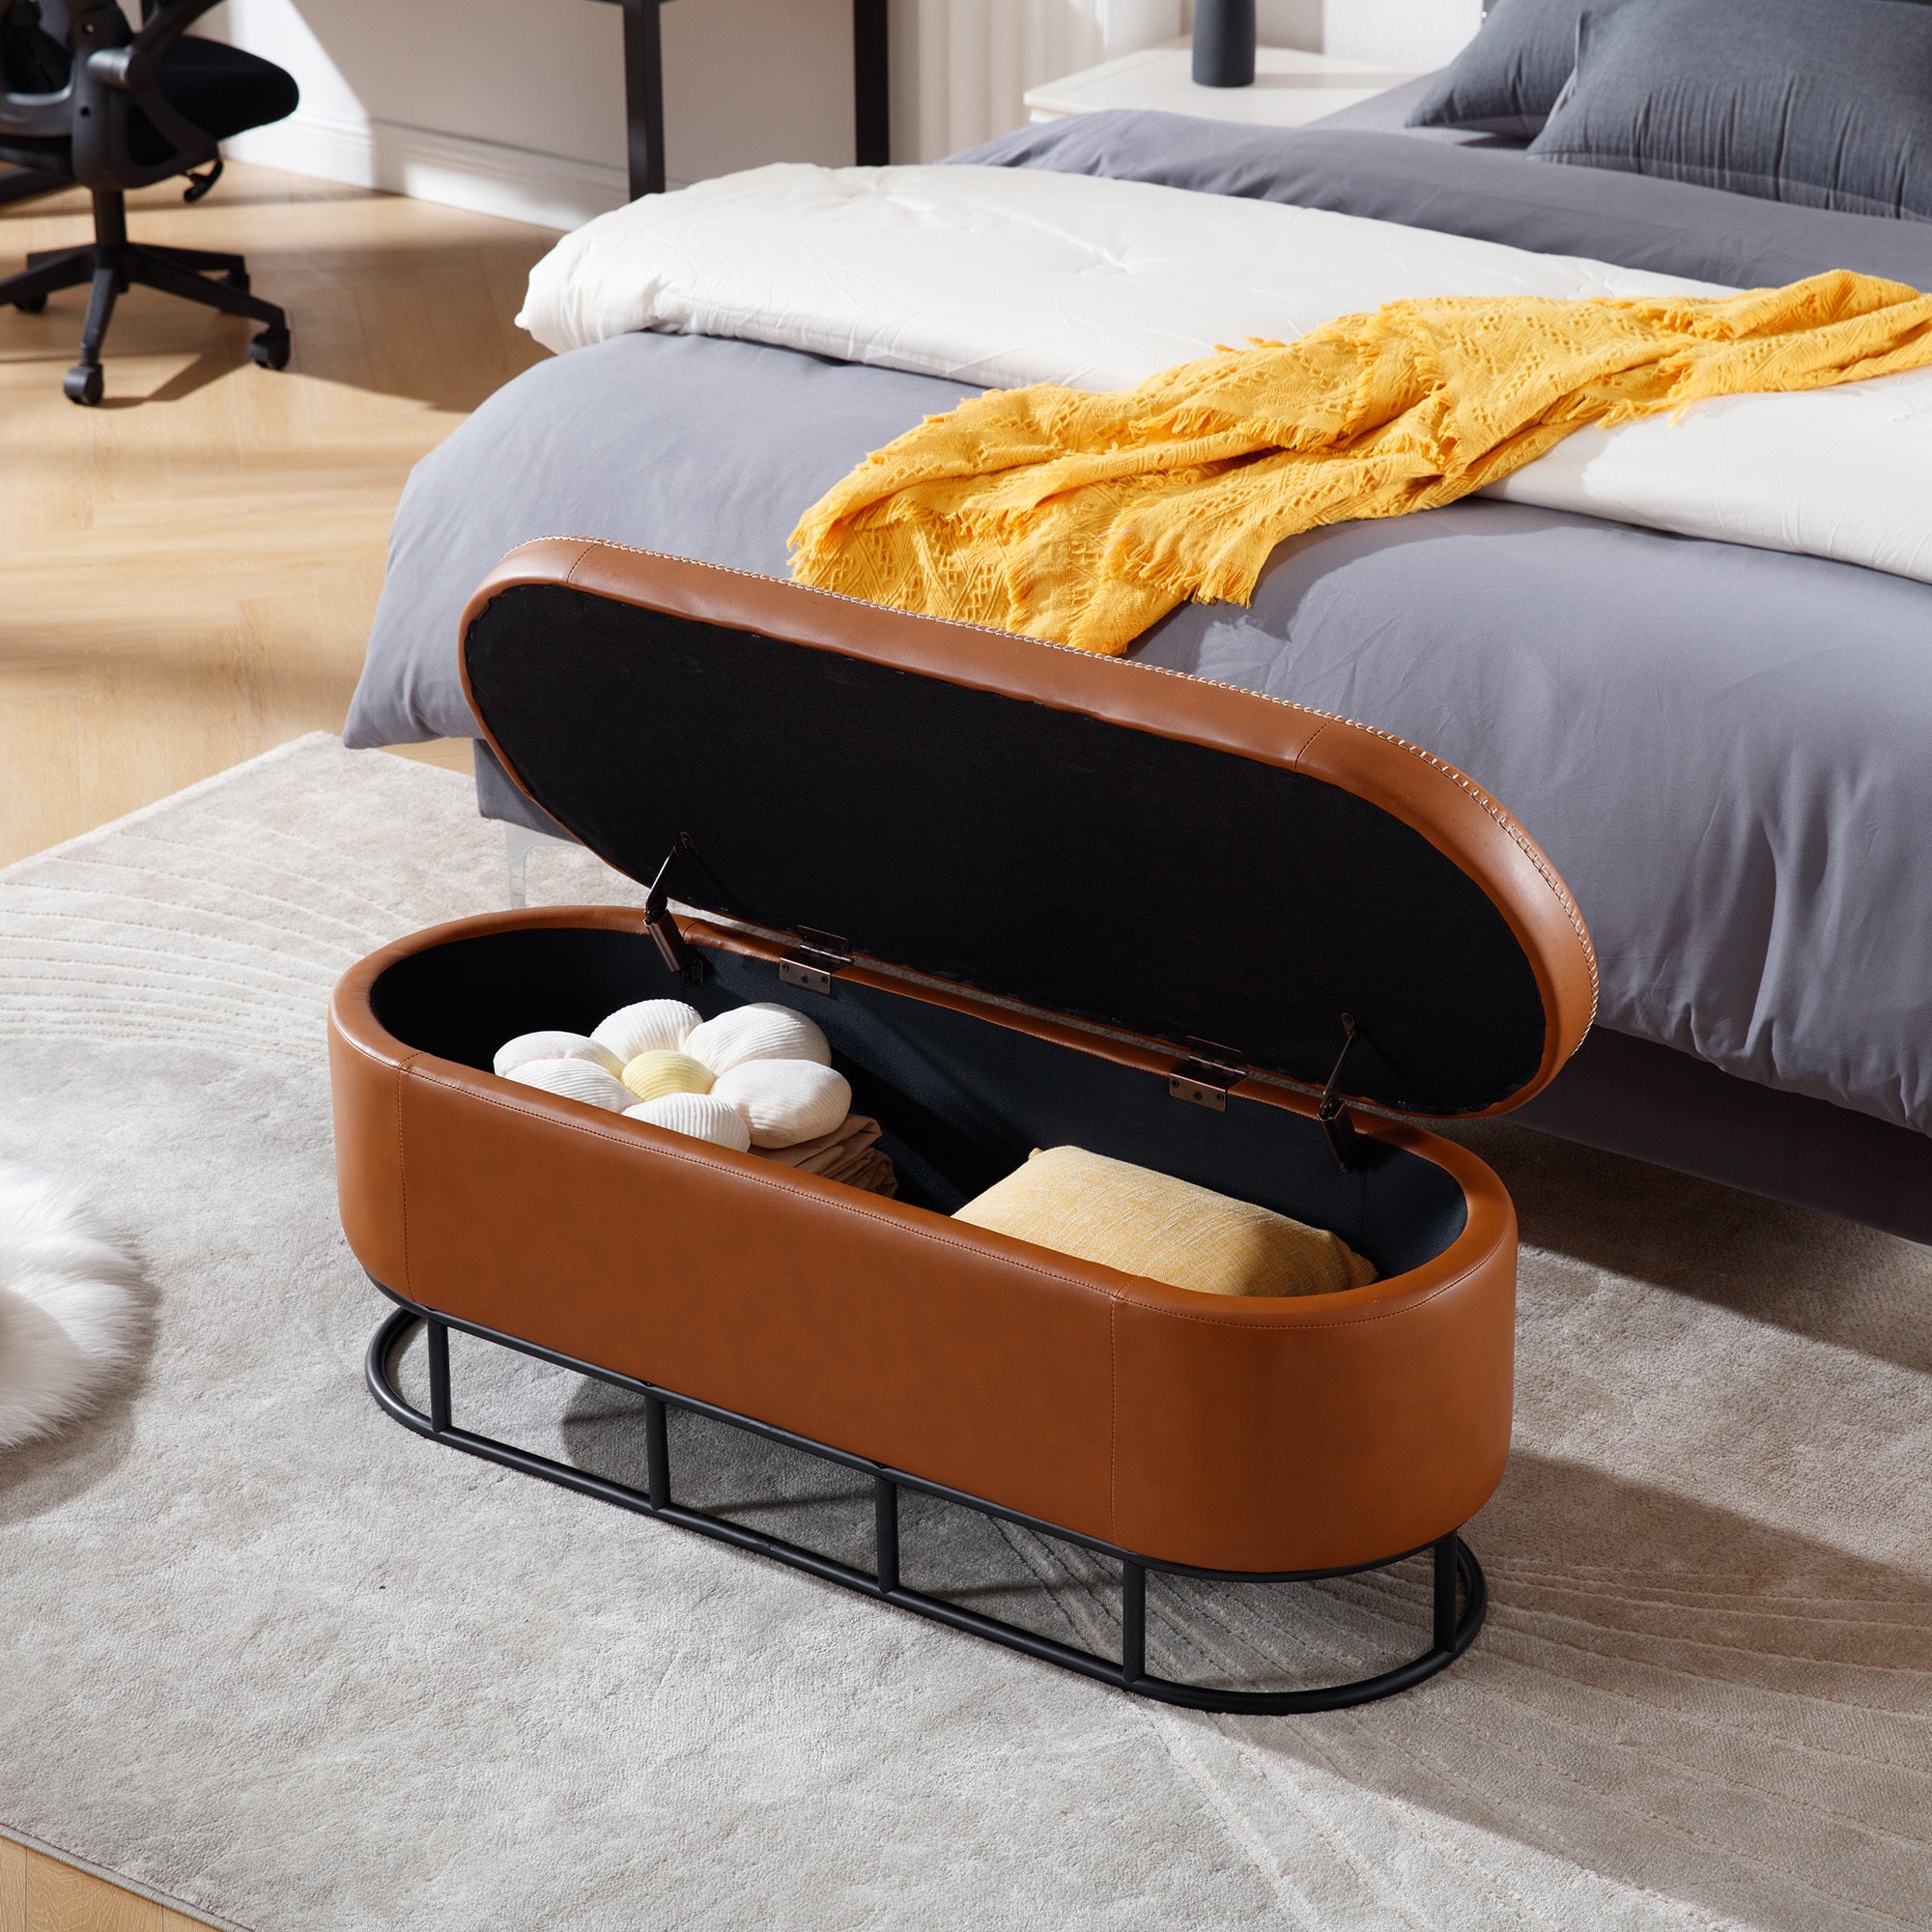 Oval Storage Bench for Living Room Bedroom End of brown-primary living space-modern-metal-internal